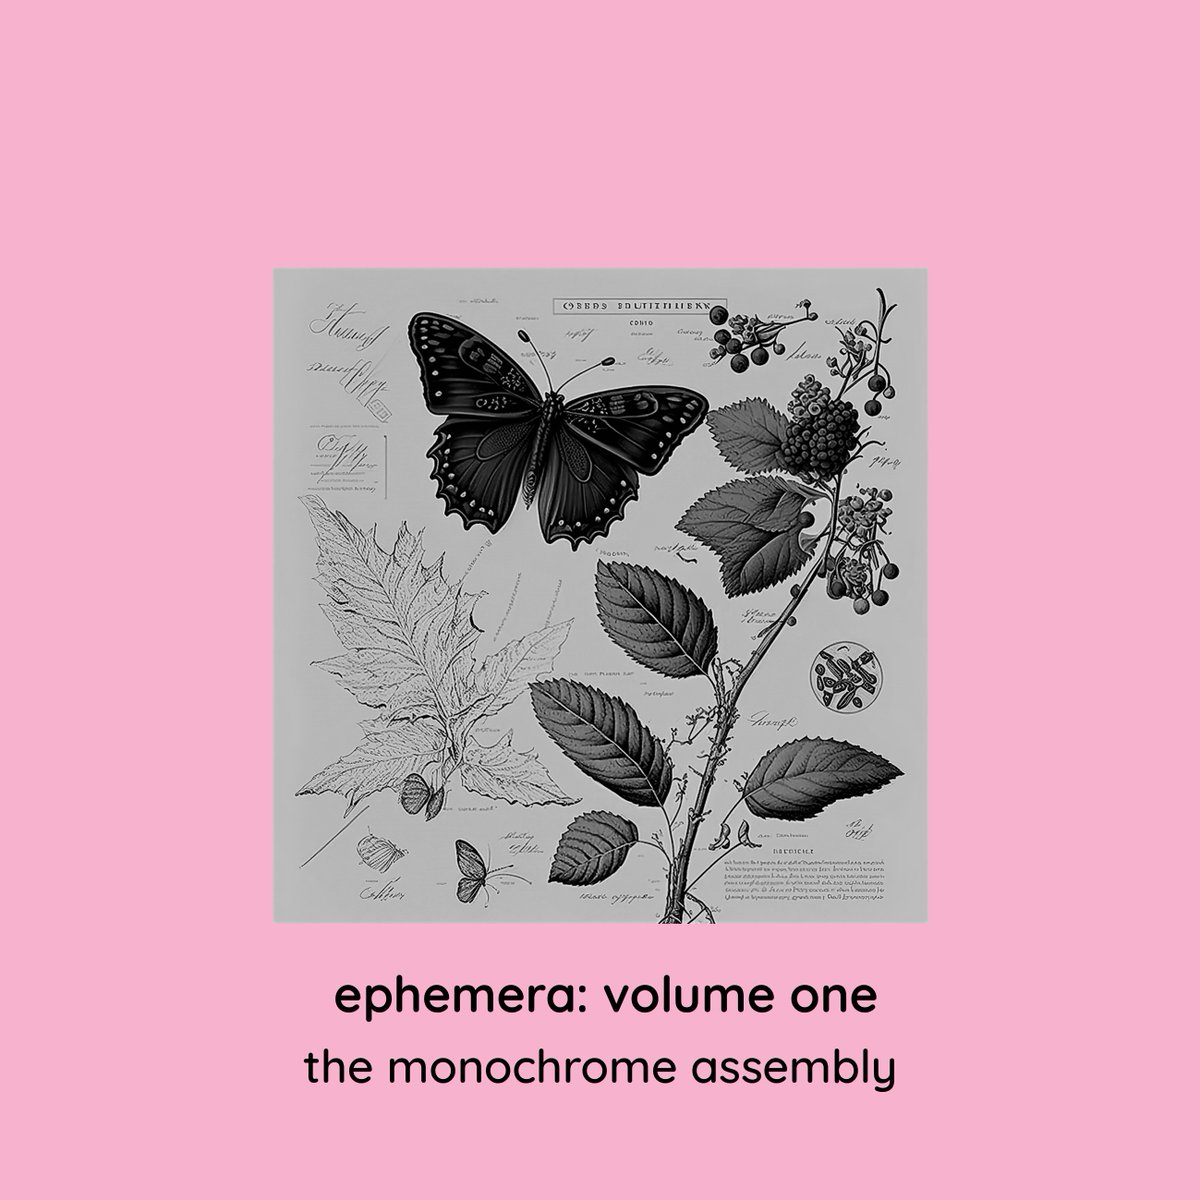 Let's tell you a bit more about Ephemera, our first Subscriber only album Track 7 takes us on a lo fi trip to 'Oostende 80' with a track from Voltage Poetry Project @voltage_poetry which will feature in a different mix on his debut album later this year monochromemotif.bandcamp.com/subscribe